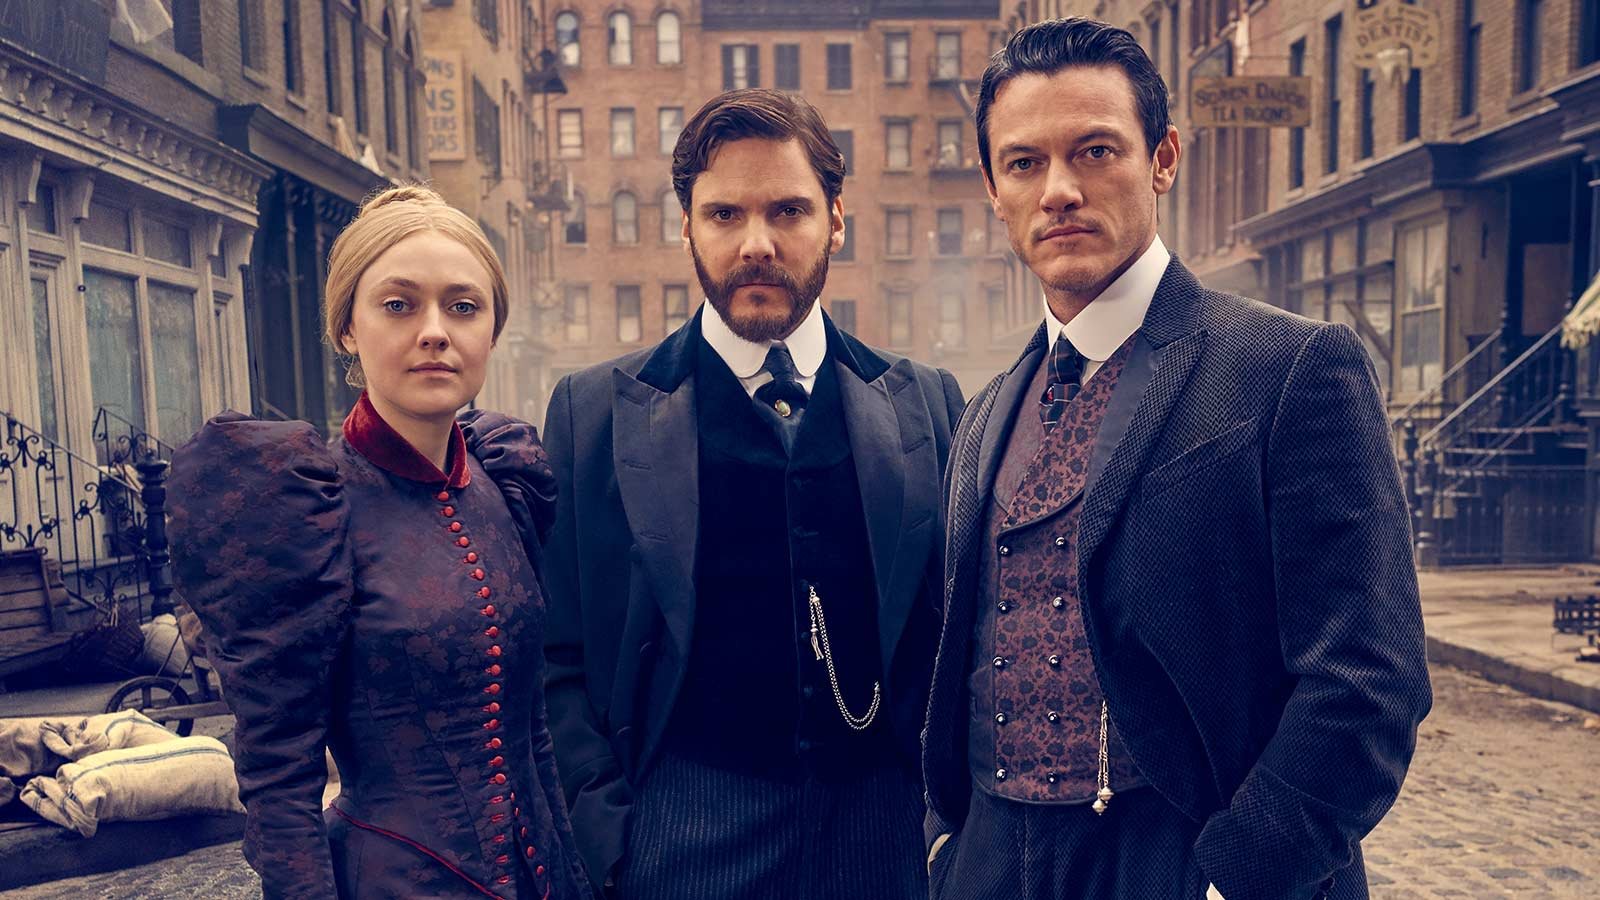 6 Shows Like Miss Scarlet and the Duke - The Alienist